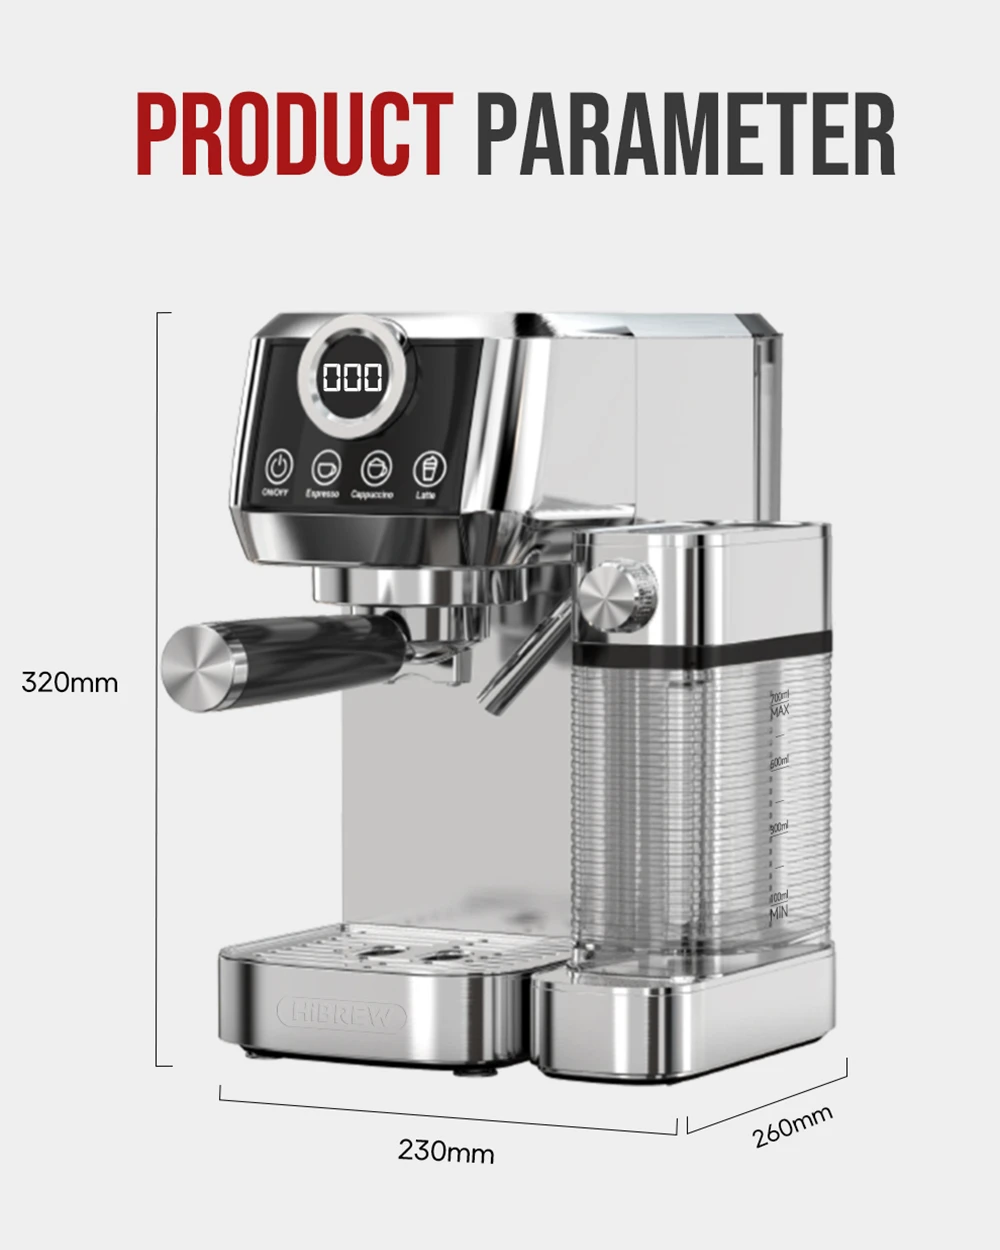 HiBREW H13A 3 in 1 Semi Automatic Coffee Machine, 6 Coffee Modes, 20Bar Extraction Pressure, 1.3L Removable Water Tank, 51mm Aluminum Alloy Handle, Dual Boiler System, 3 Adjustable Temperature Levels